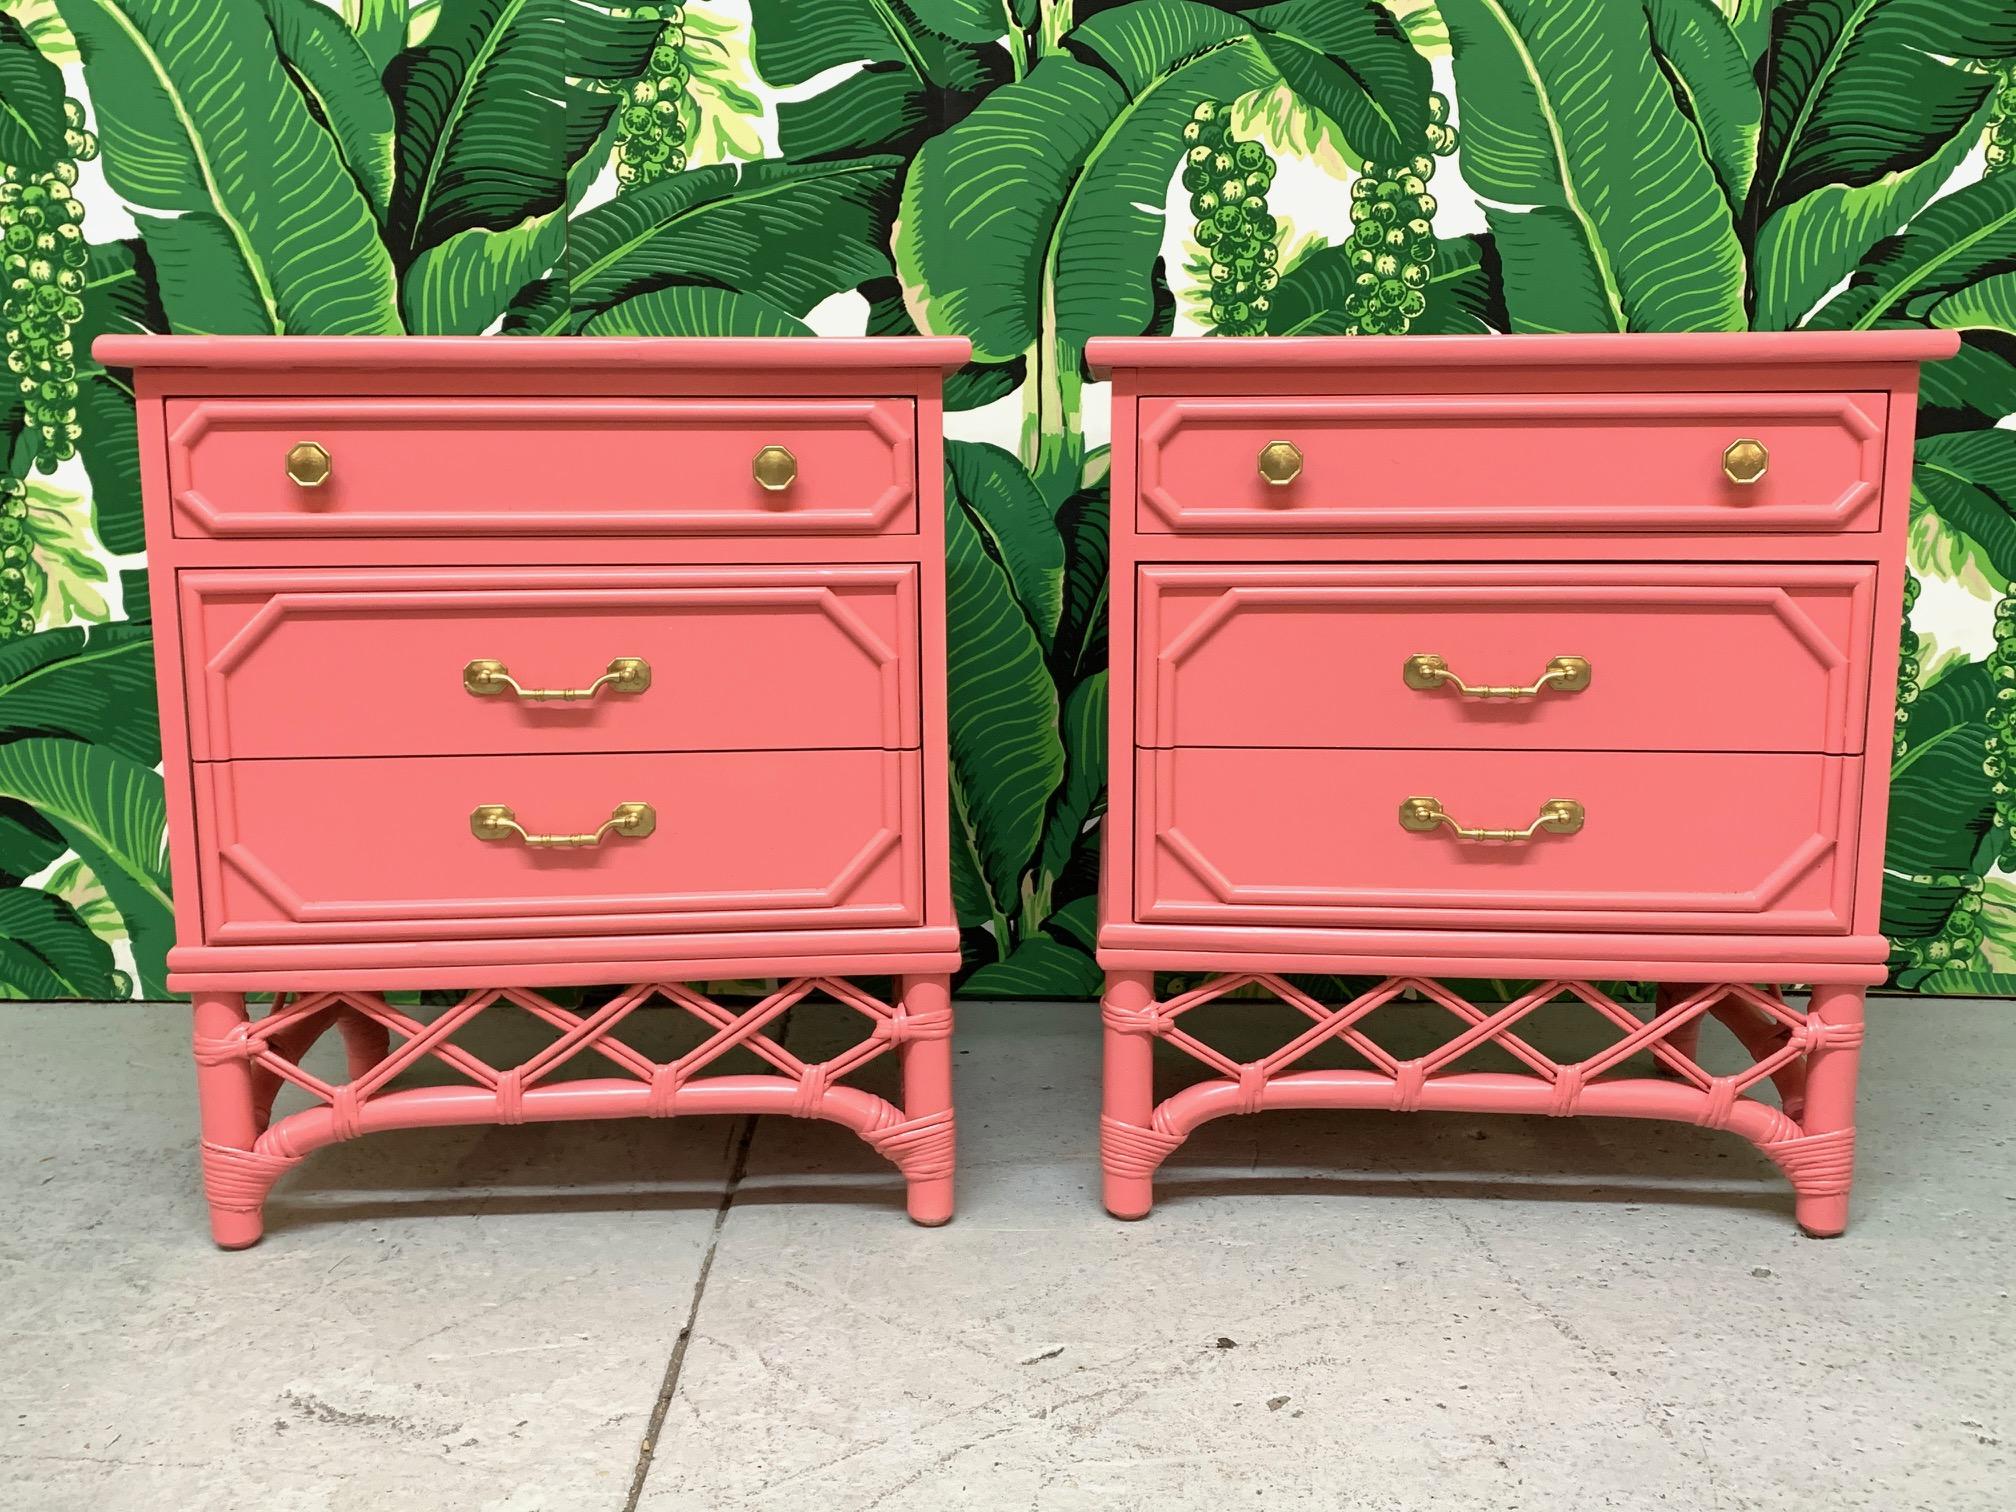 Pair of Ficks Reed nightstands features rattan detailing and newly lacquered gloss pink finish. Faux bamboo on drawer faces and gold hardware. Very good condition with minor imperfections to the newly lacquered finish.